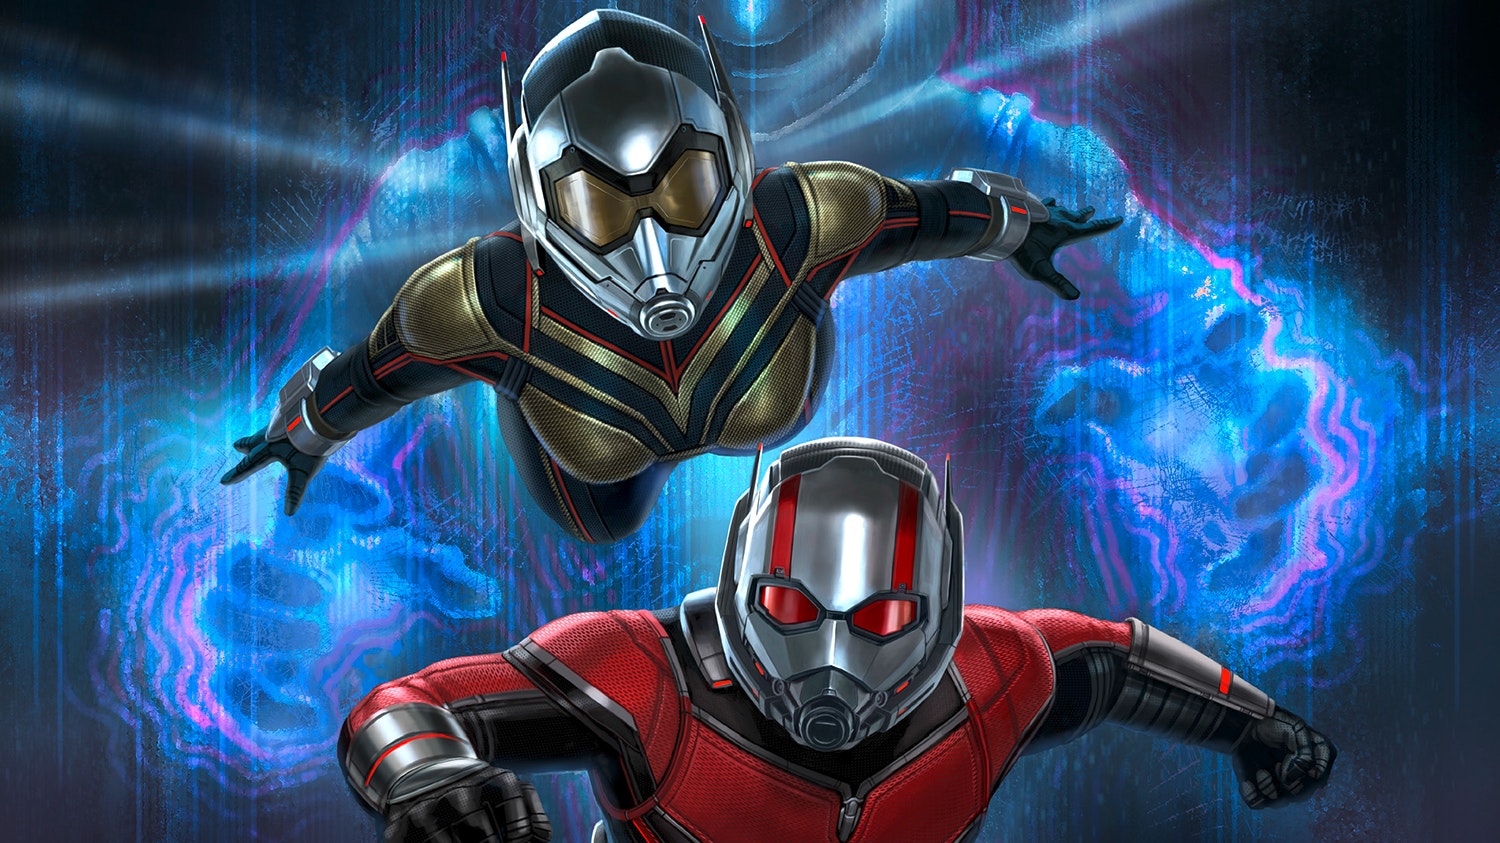 Empire Magazine March 2023: Ant-Man And The Wasp Quantumania Hugh